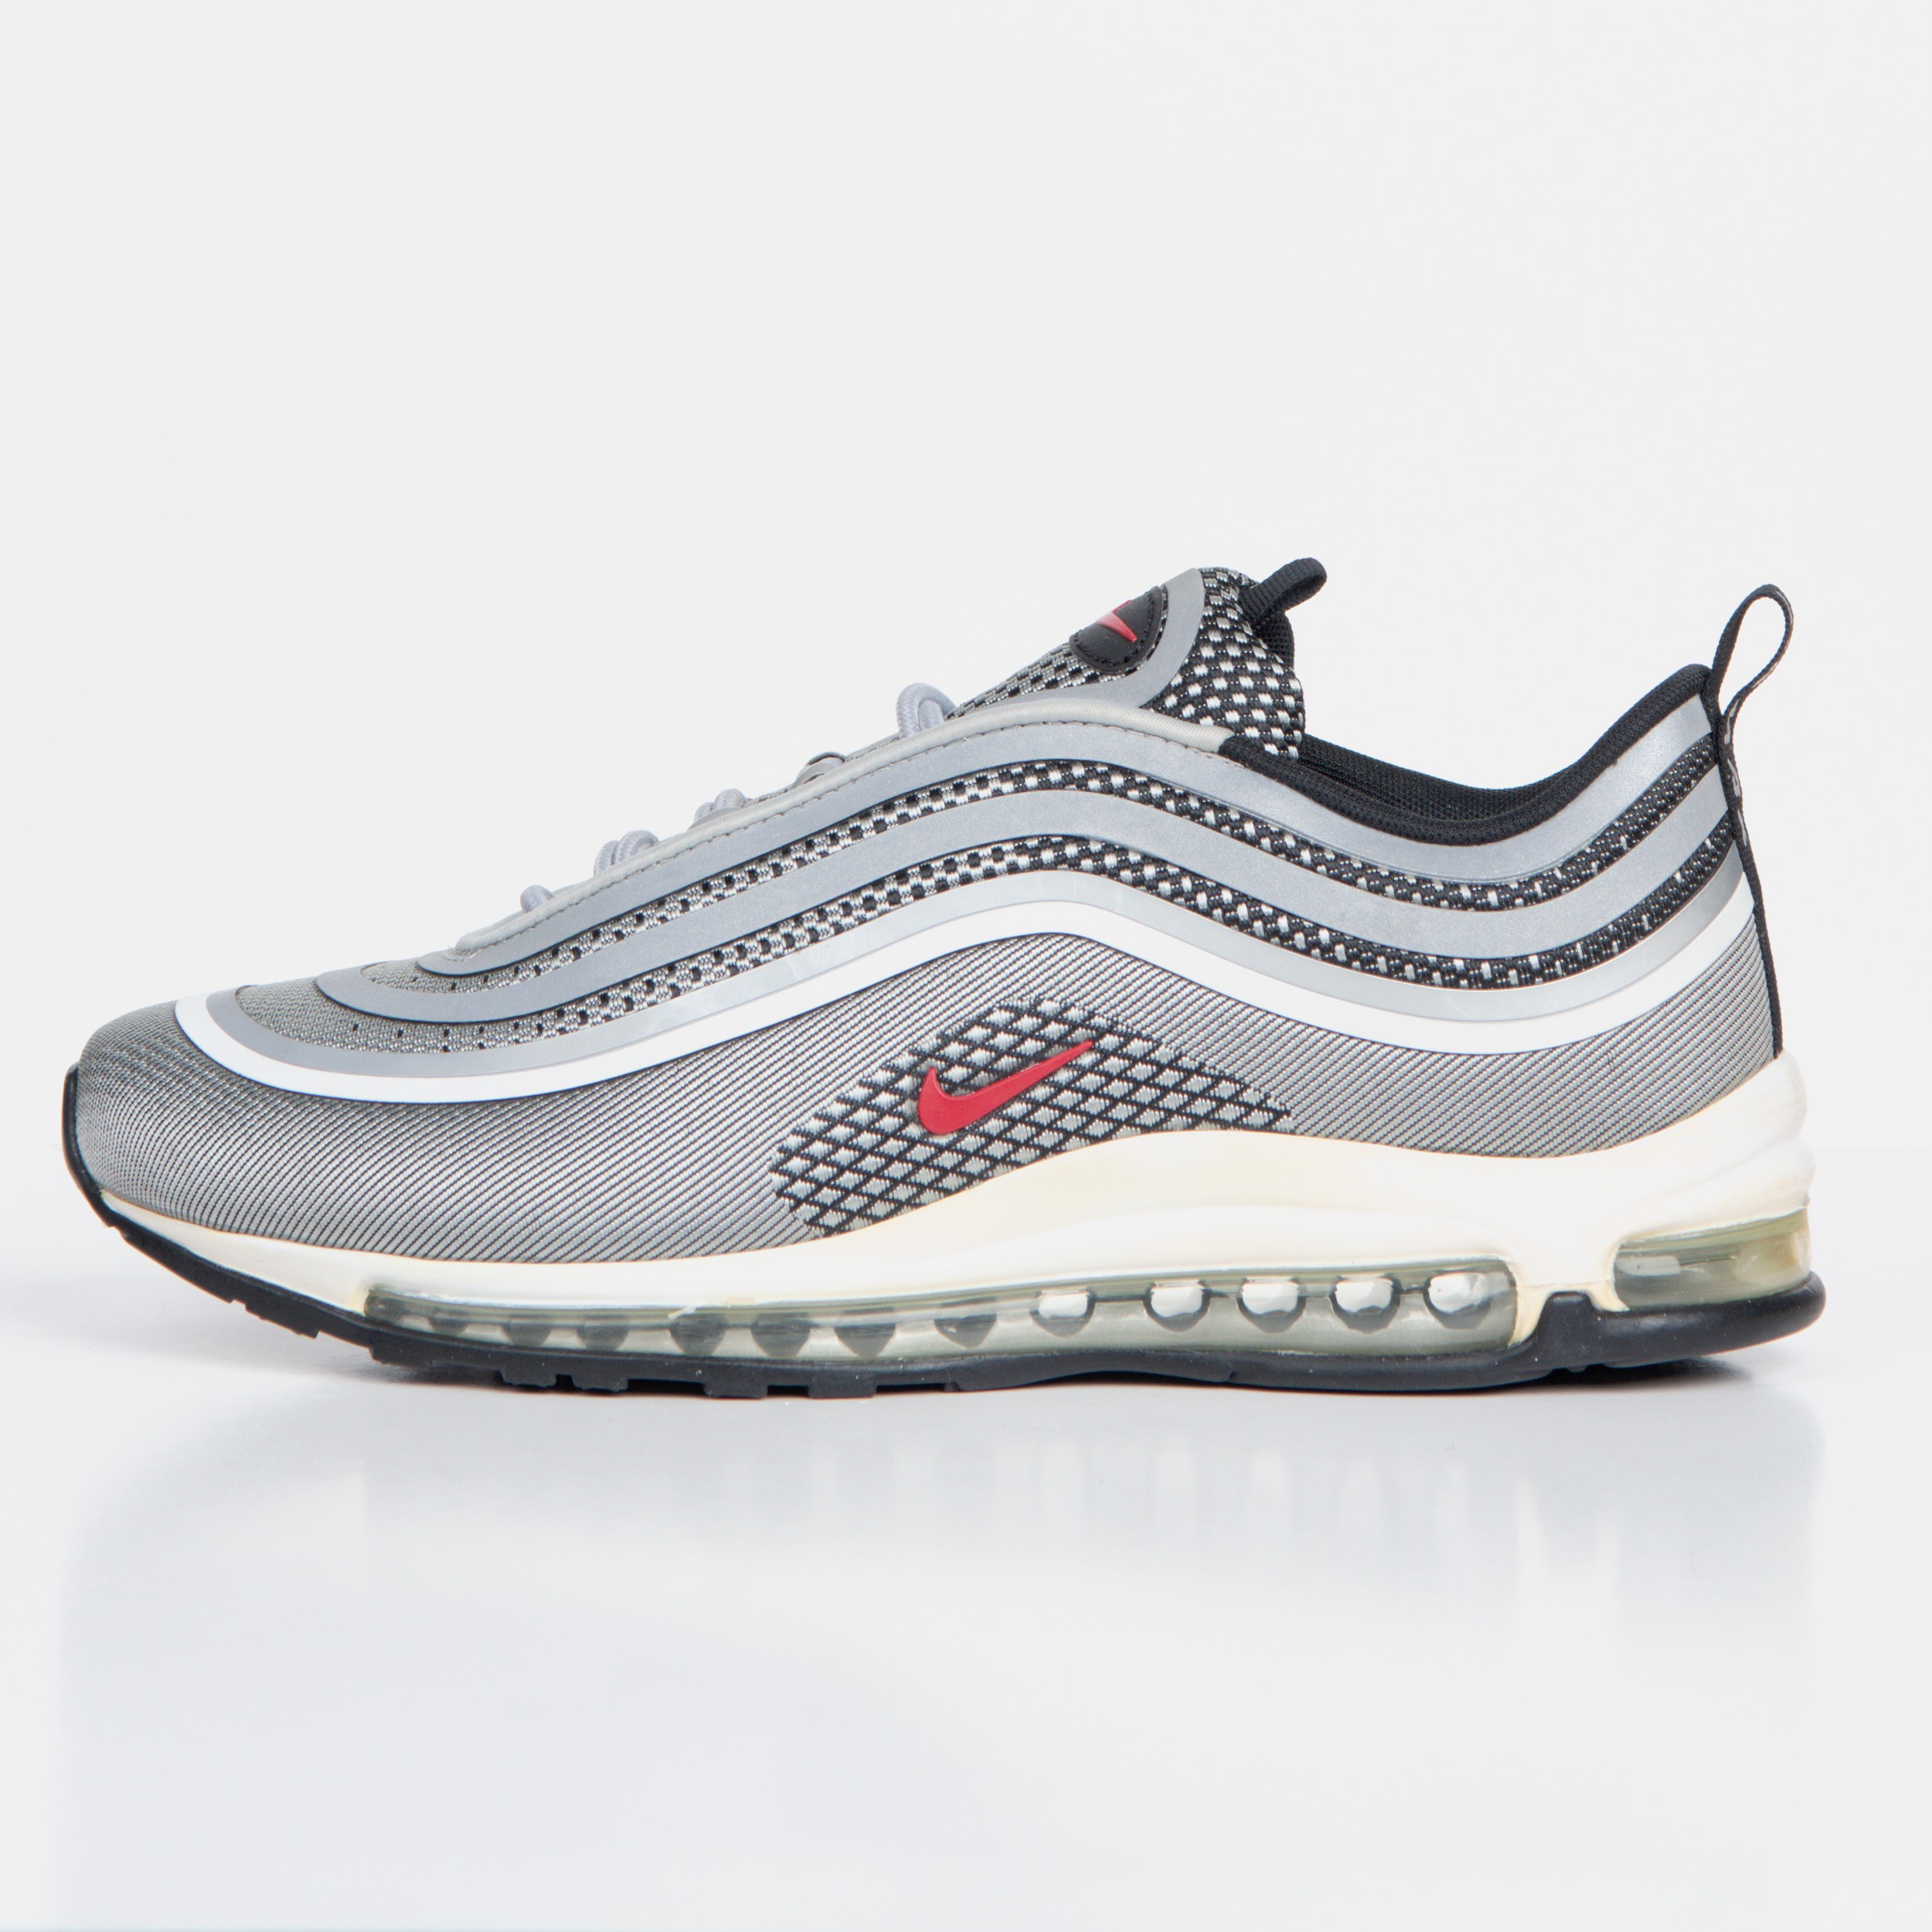 Citizenship Setting advertise RE-POCKETS NIKE TRAINERS RE-POCKETS Nike Air Max 97 Ultra 17 Silver Bullet